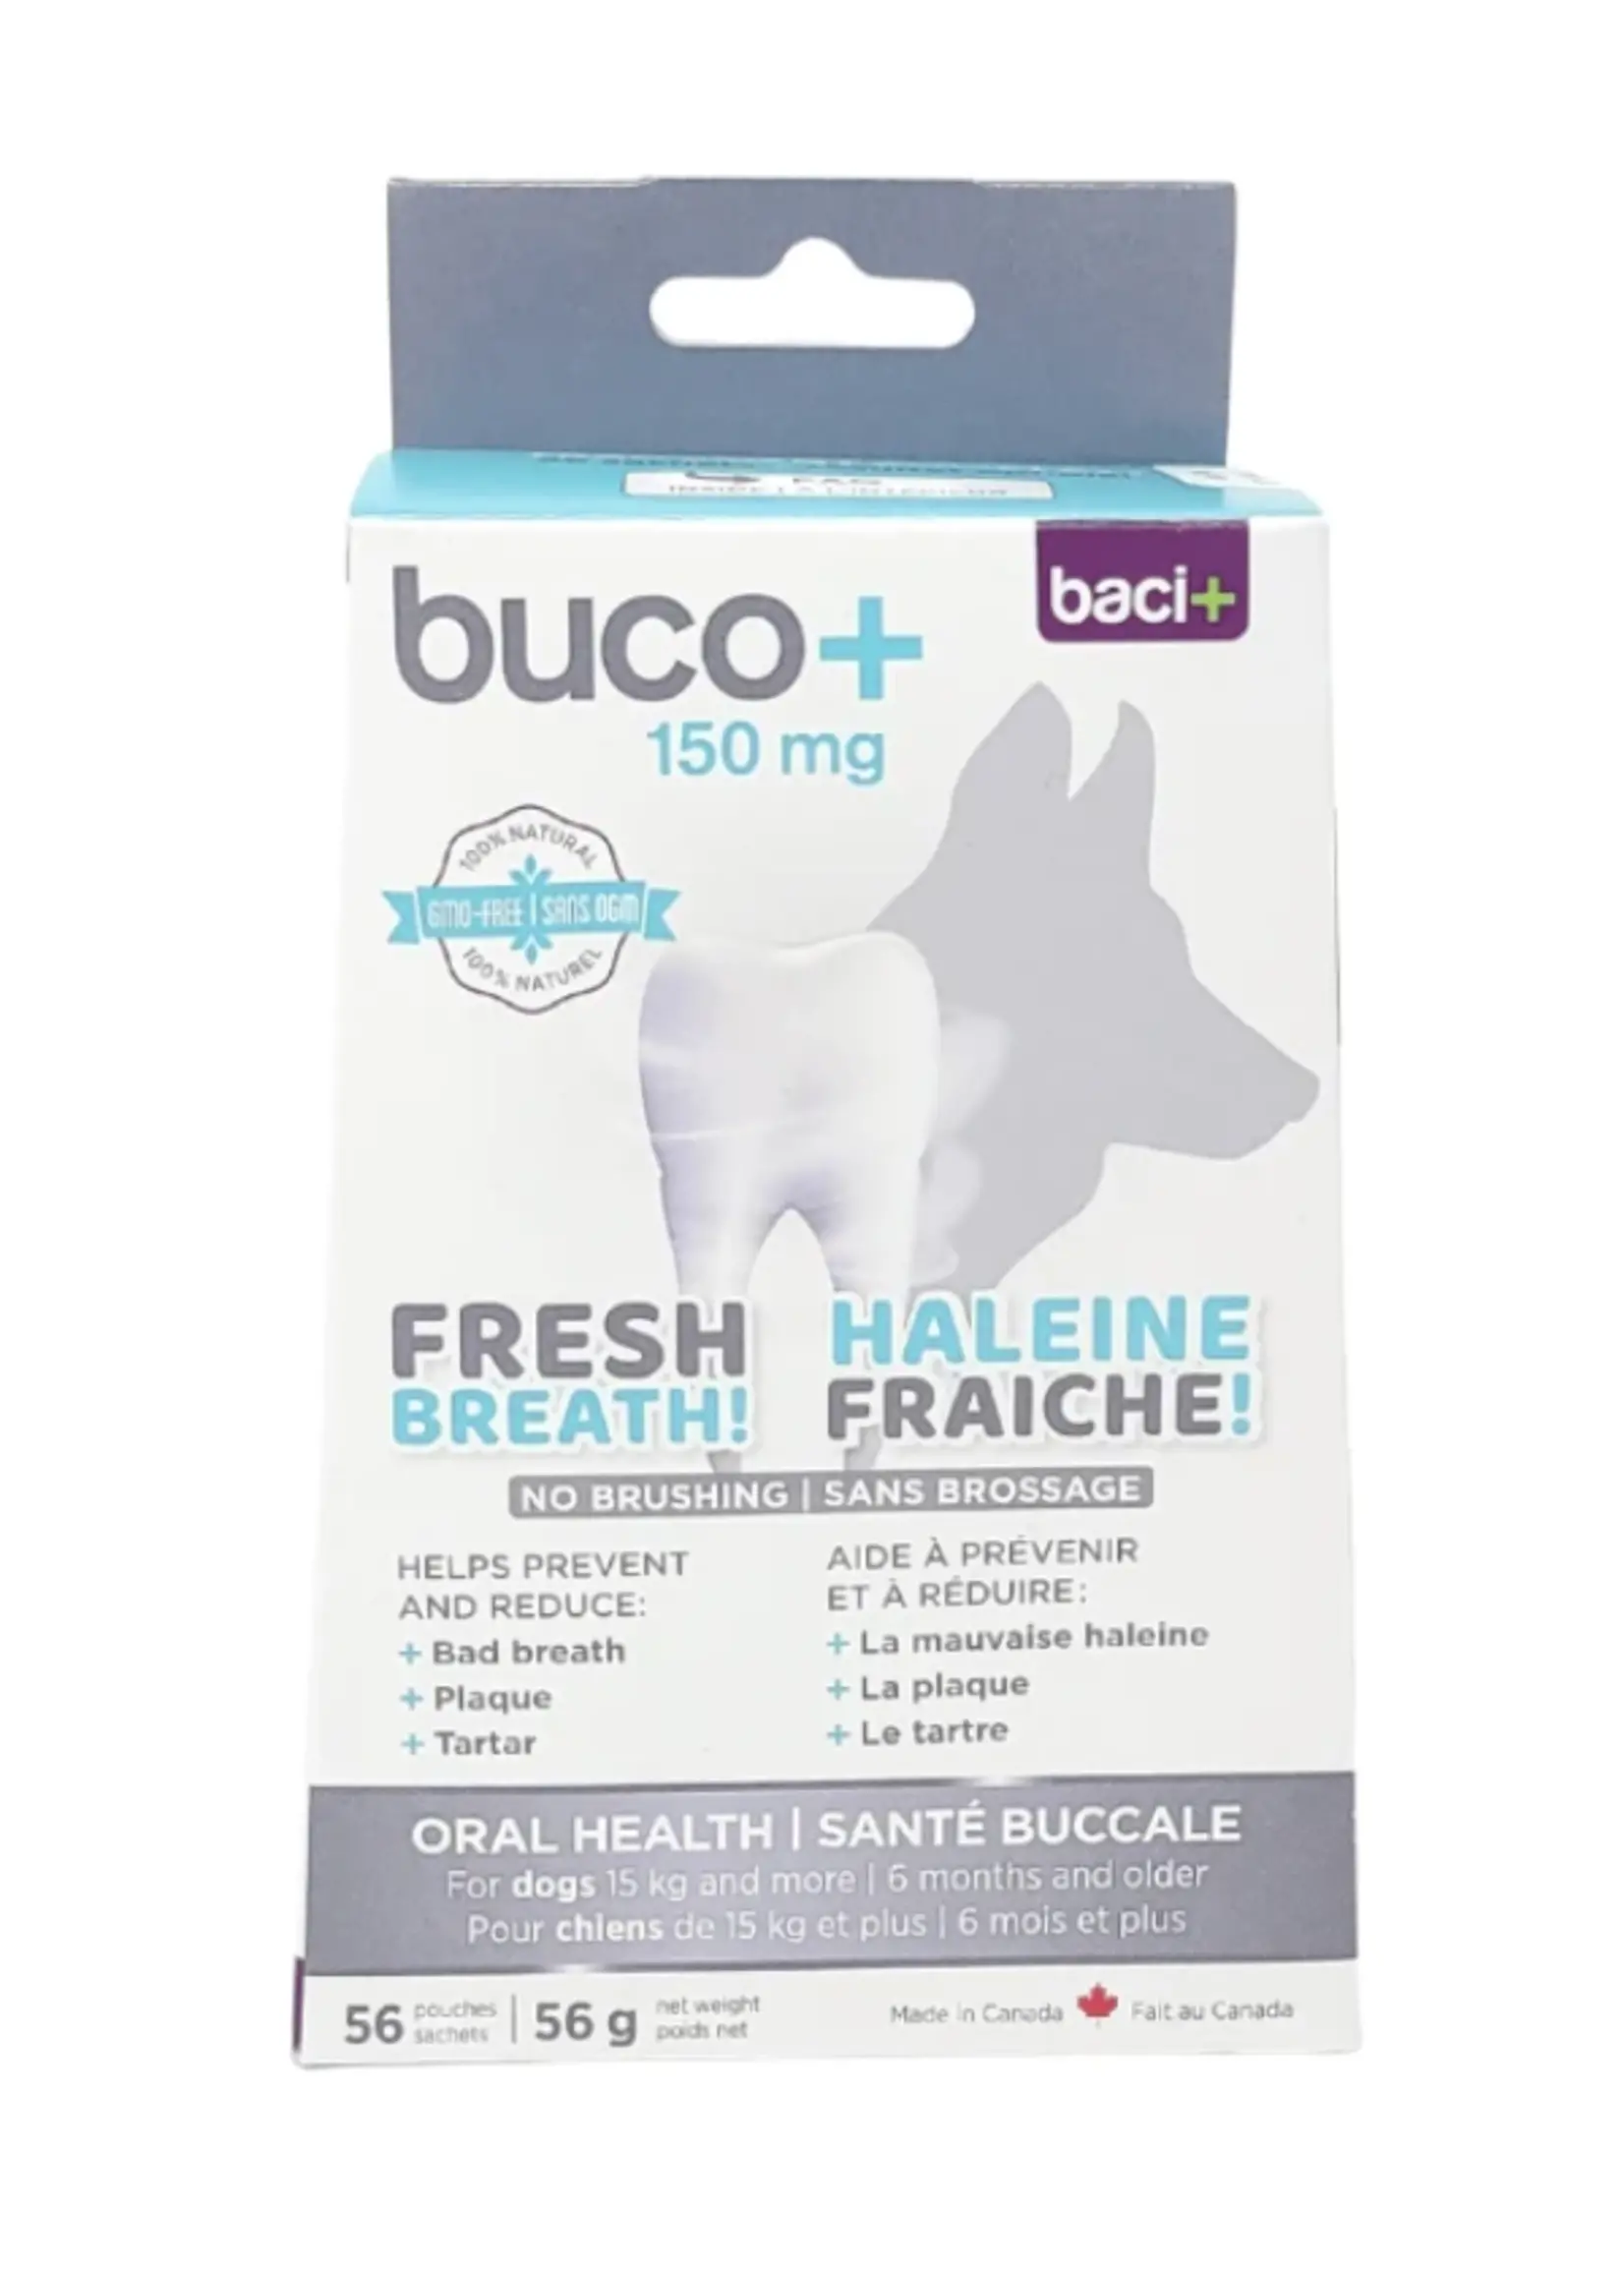 Baci+ Buco+ soins dentaires chiens et chats